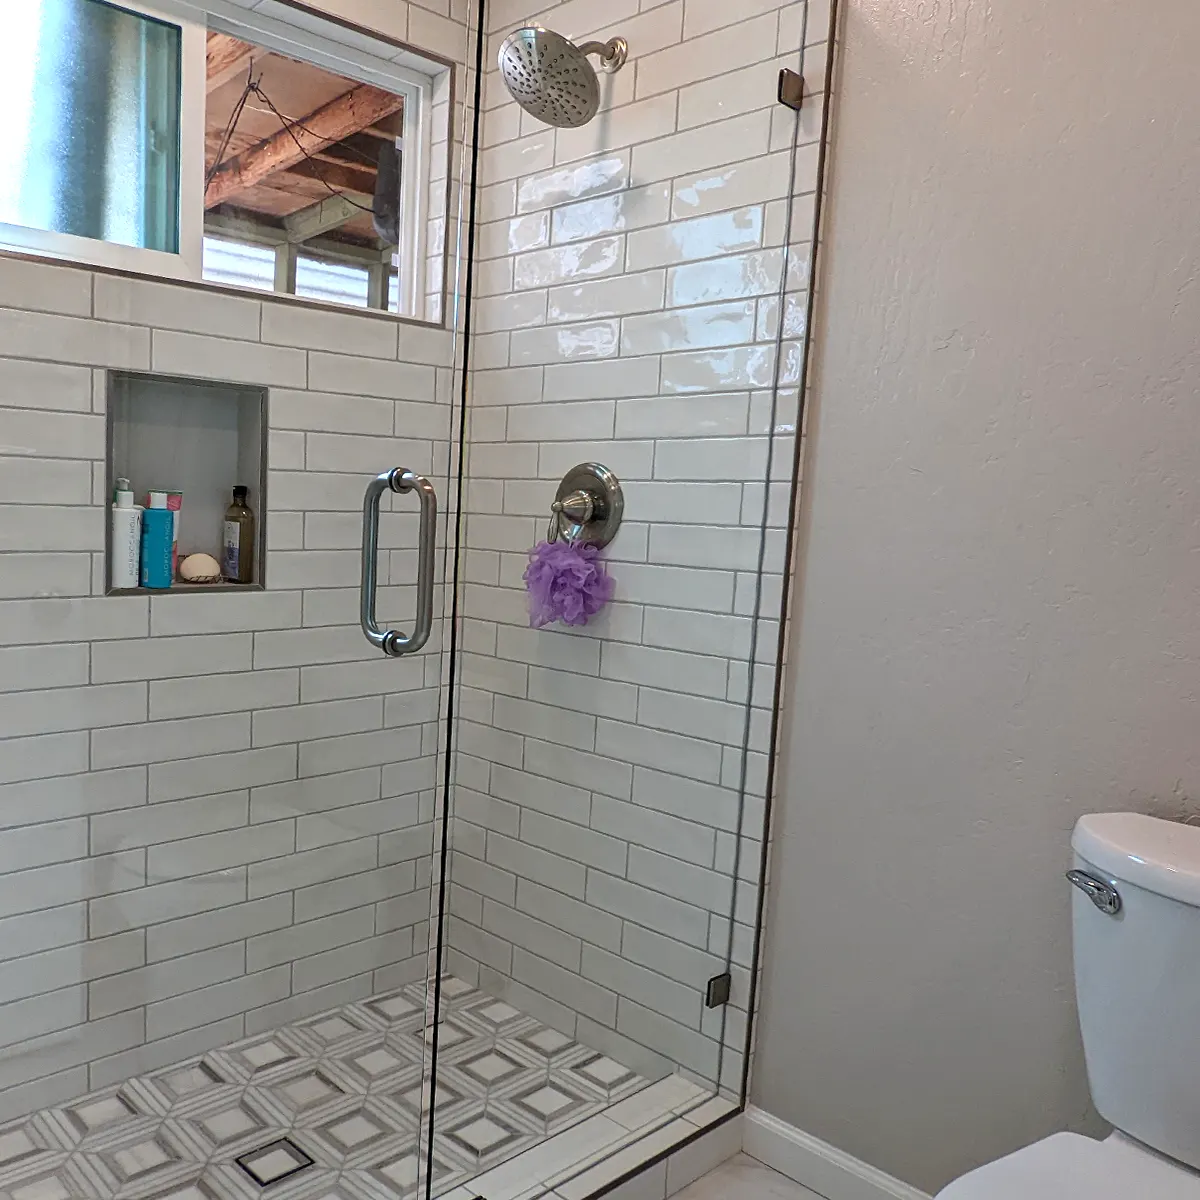 A glass shower after a remodel